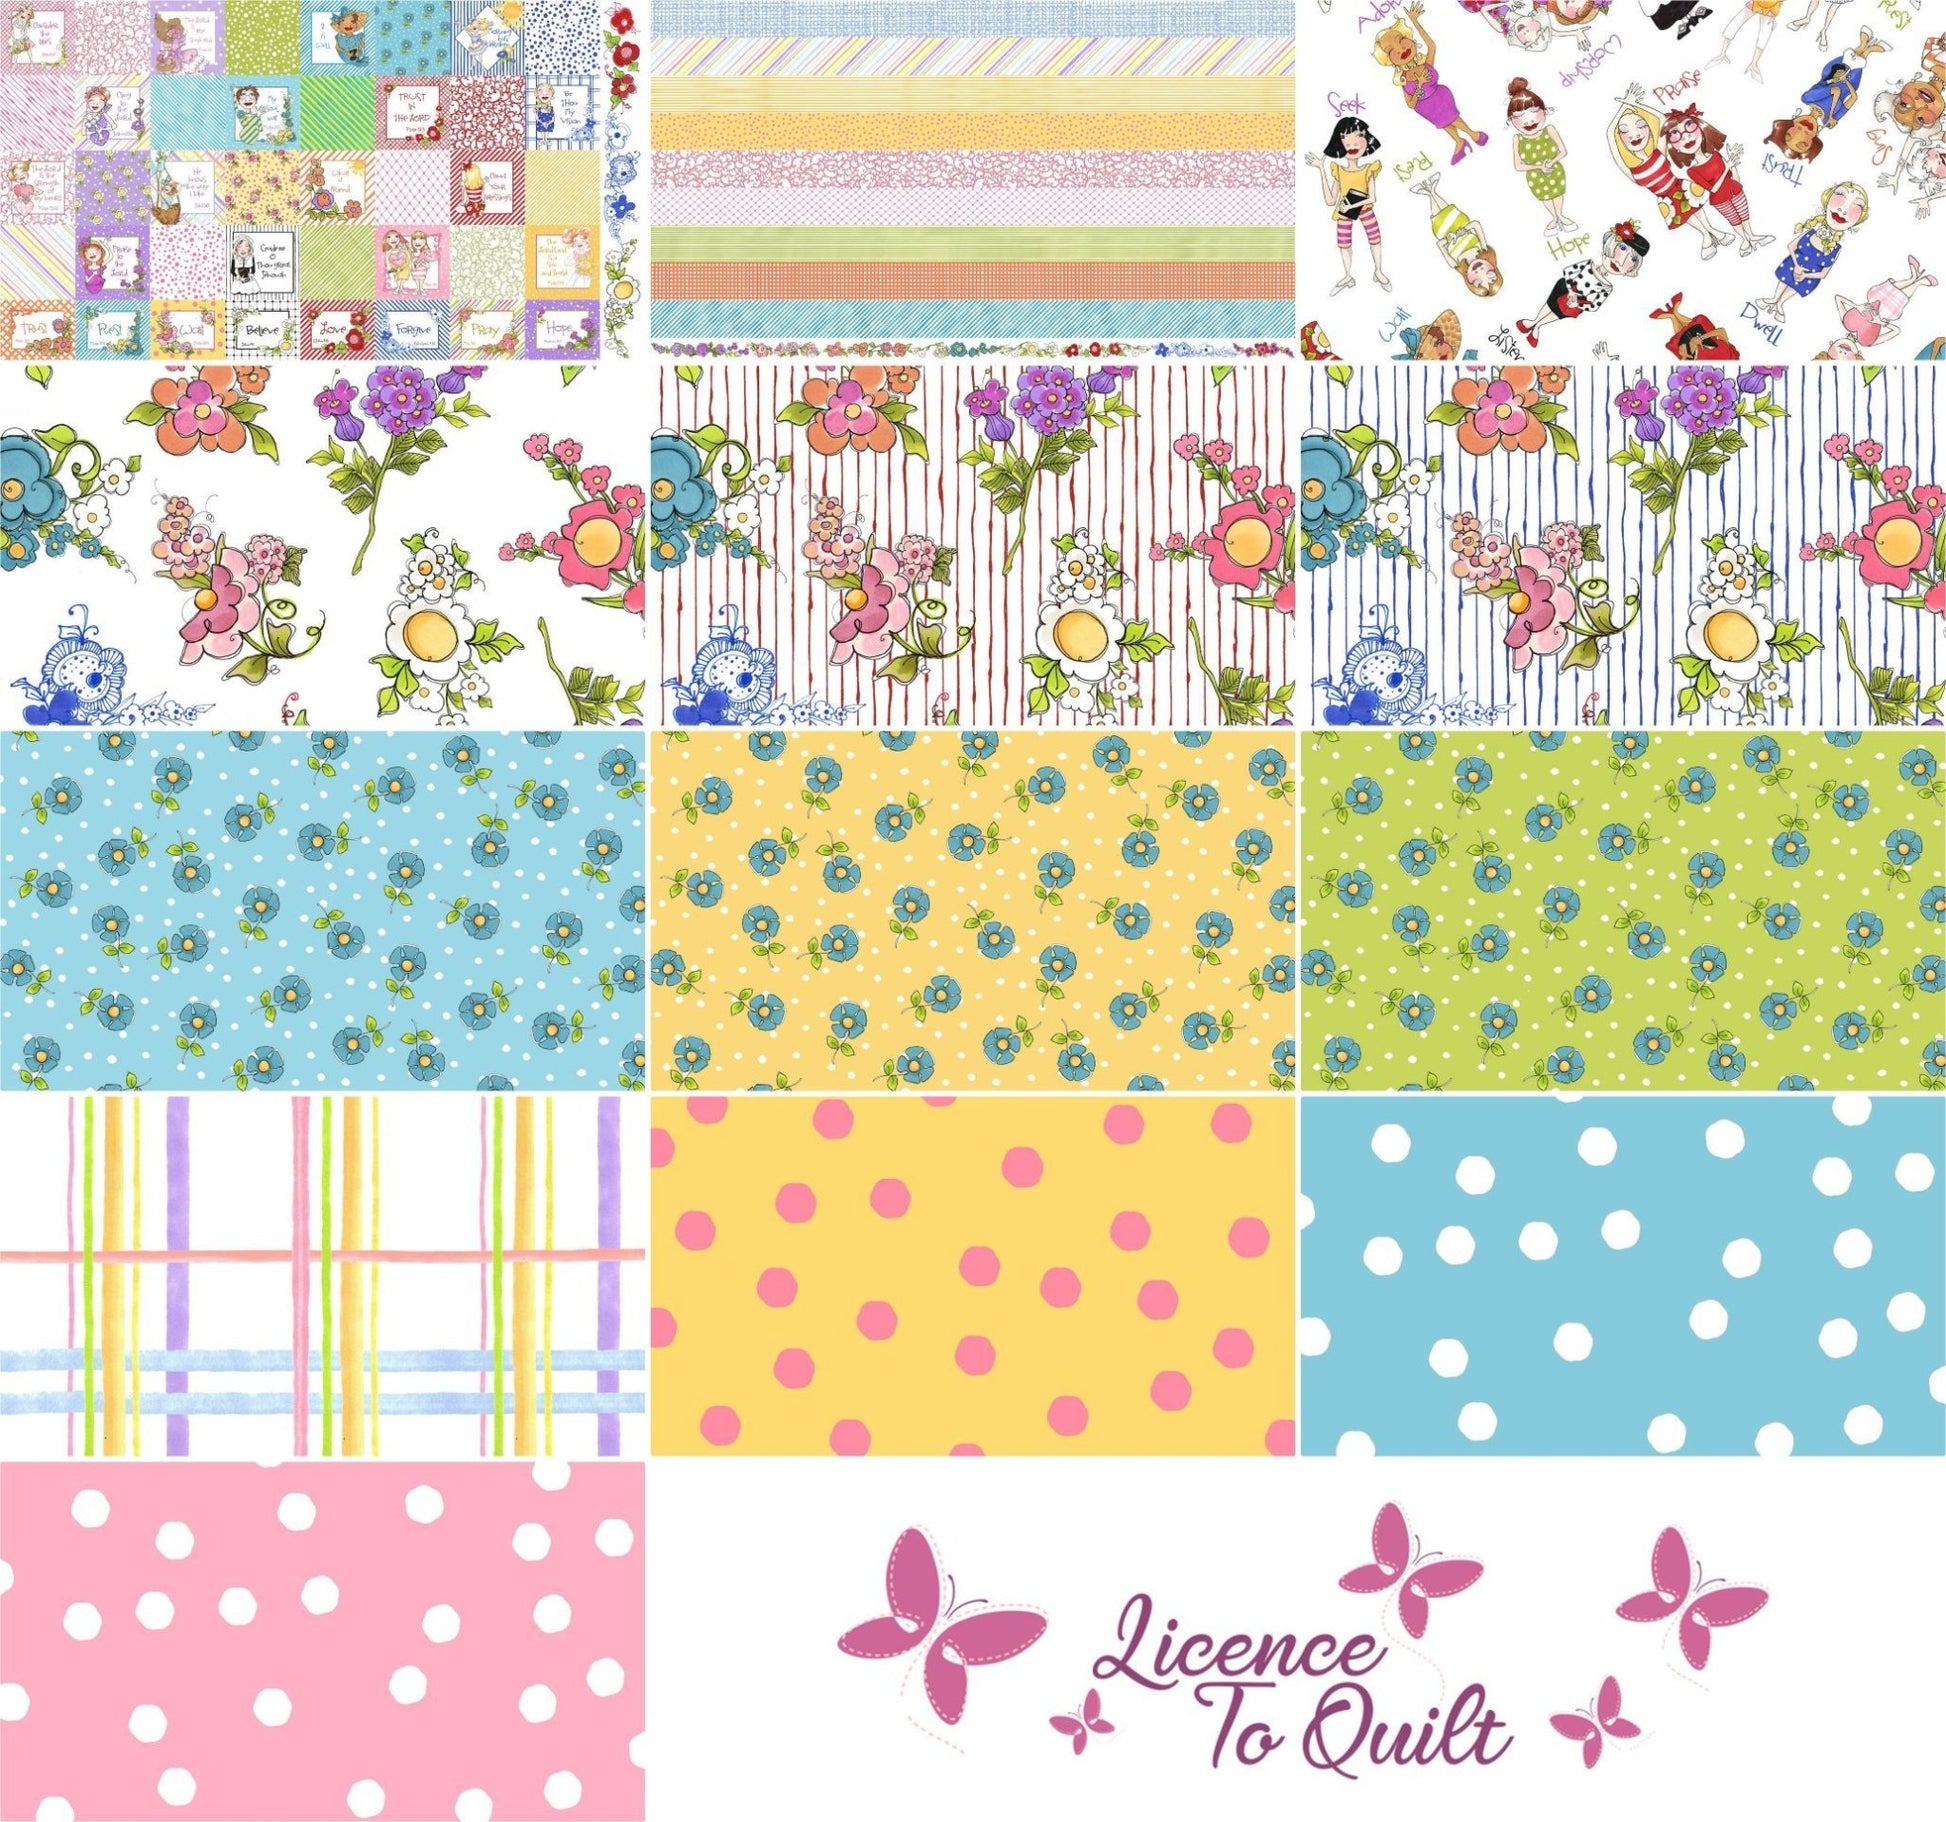 Joy Journey - Jumbo Dots Yellow / Pink Fabric - Licence To Quilt